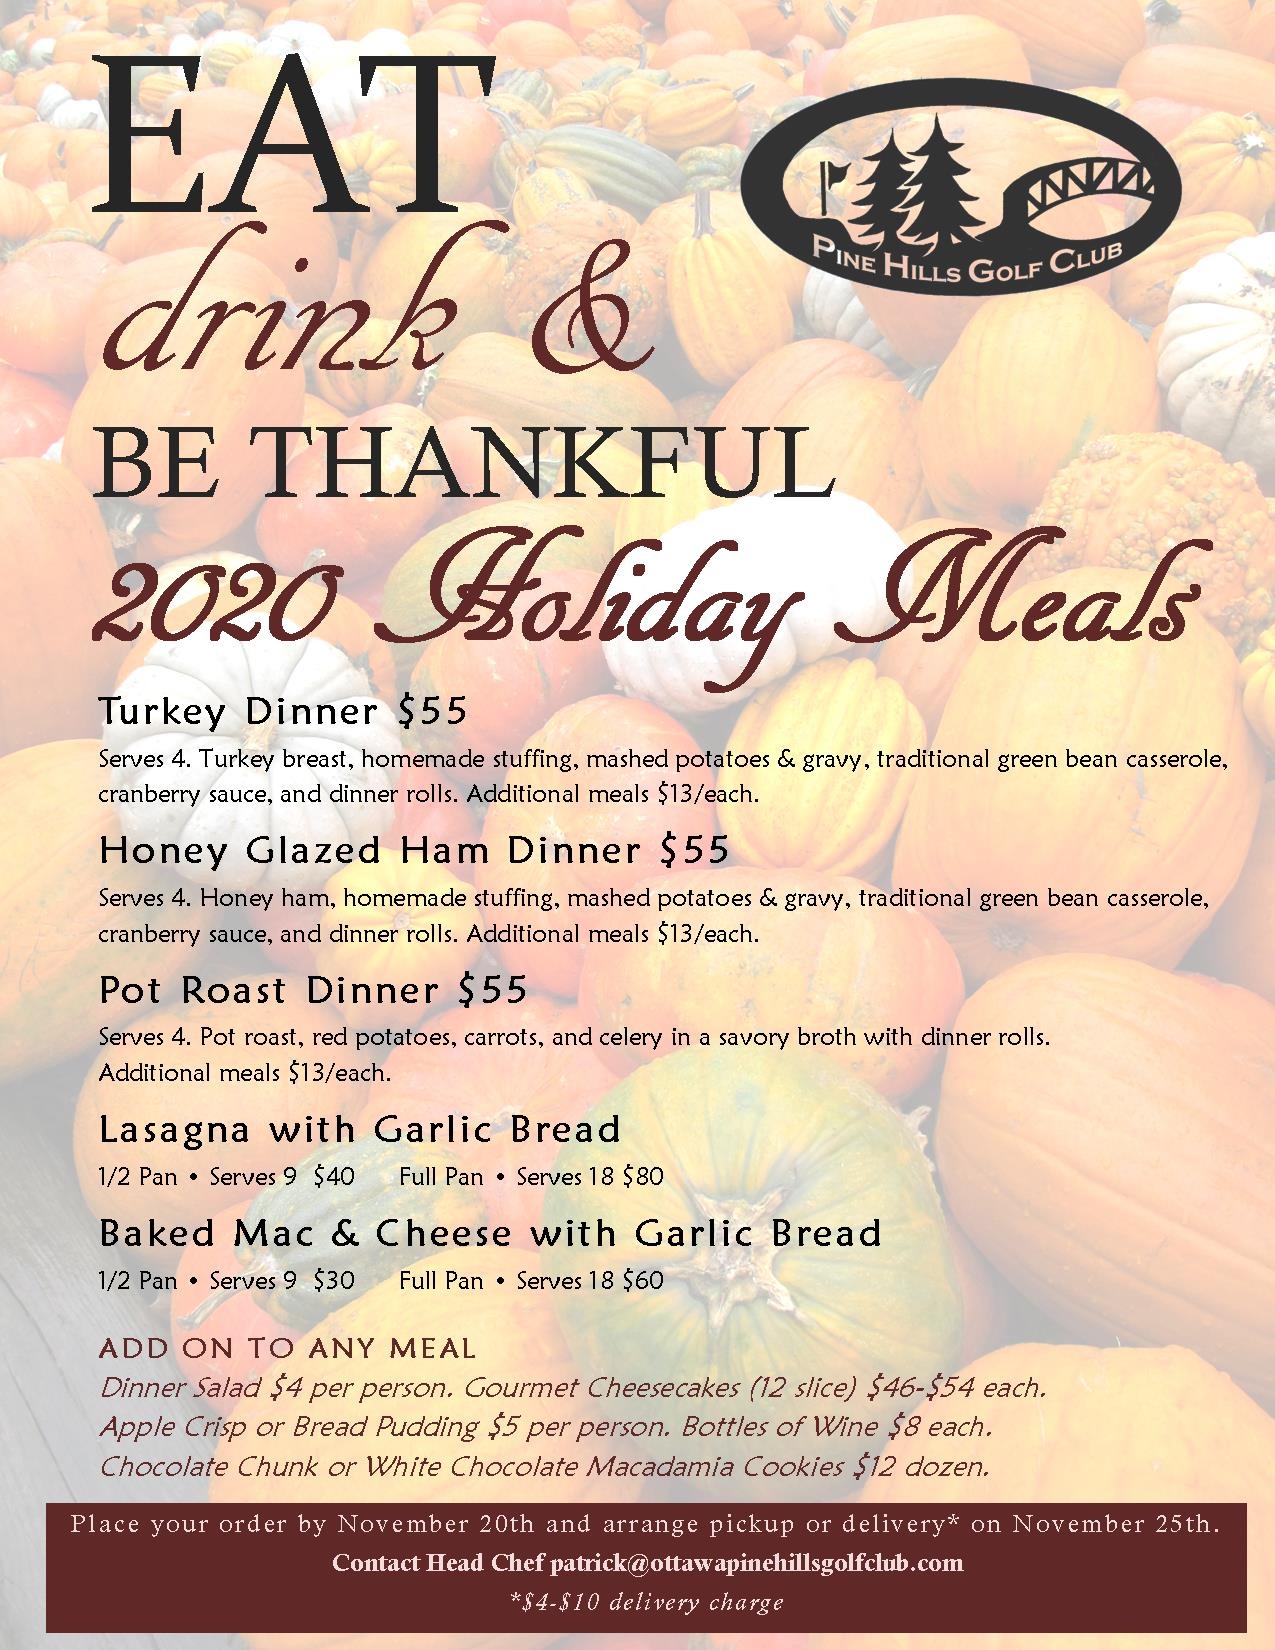 Eat, Drink & Be Thankful Holiday Meals